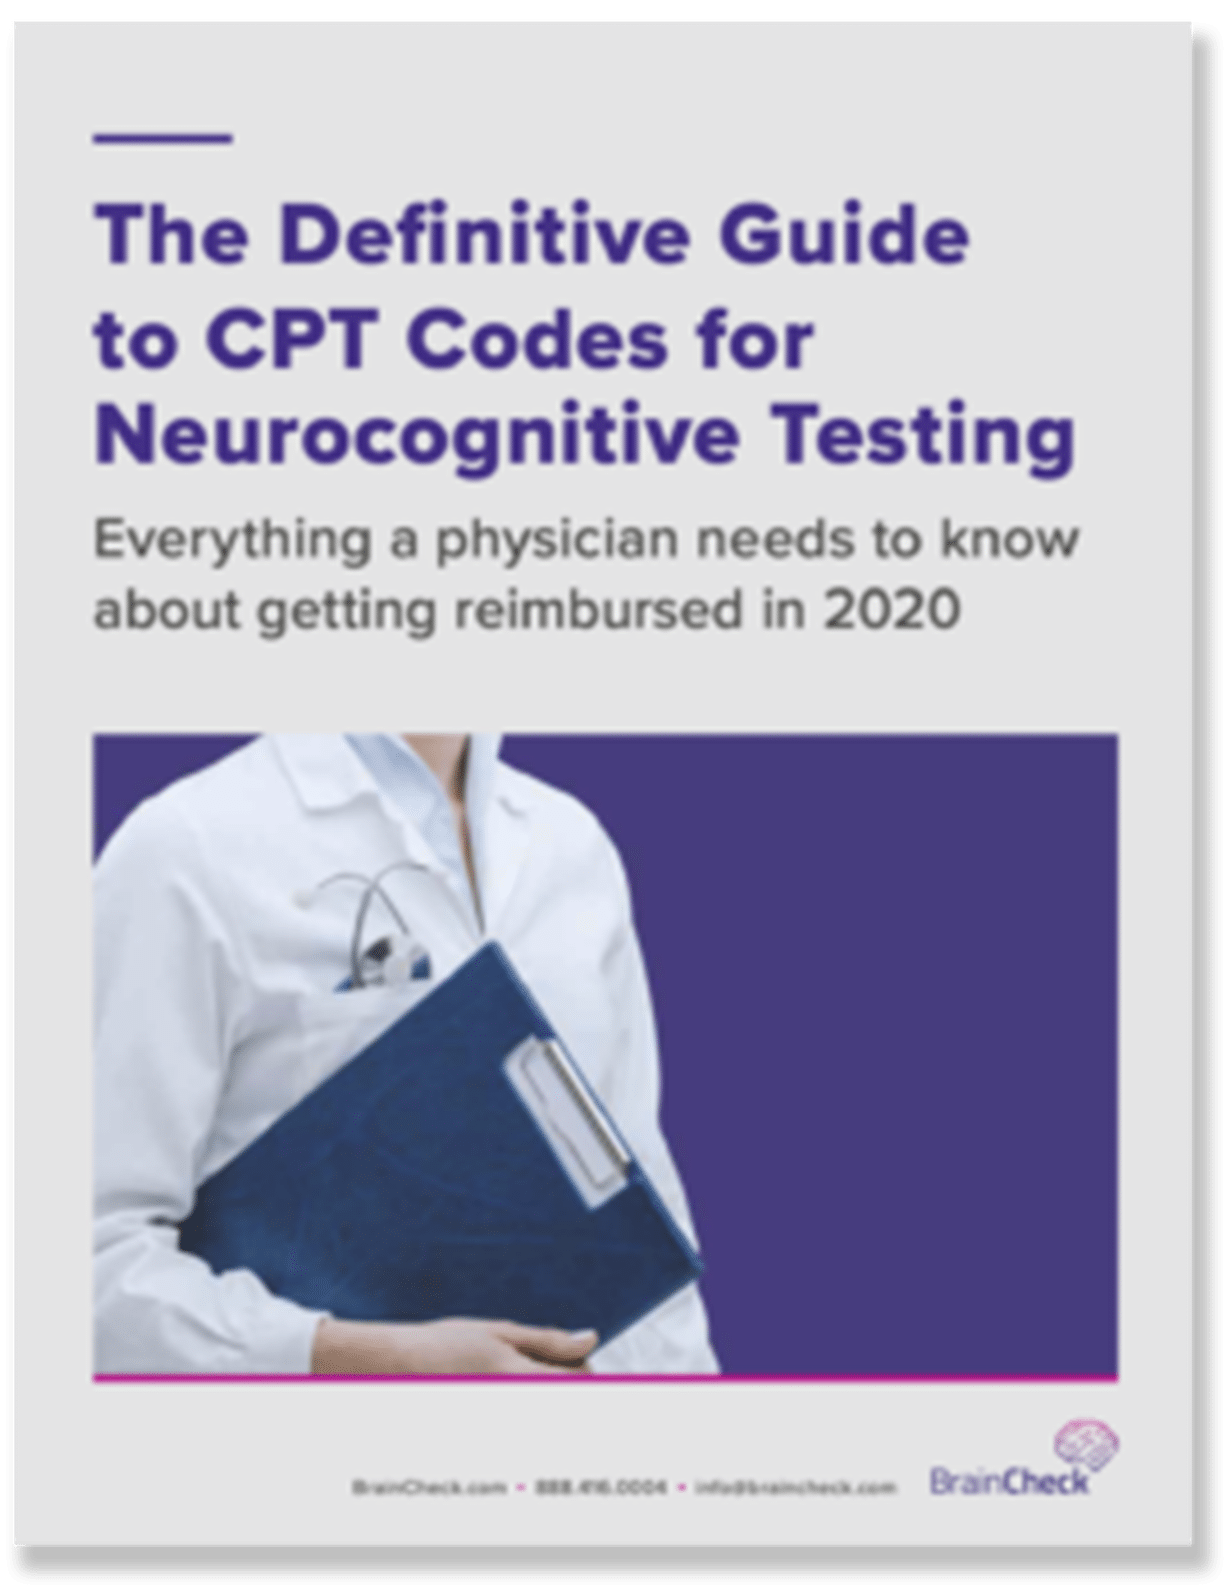 The Definitive Guide to CPT Changes for Neurocognitive Testing